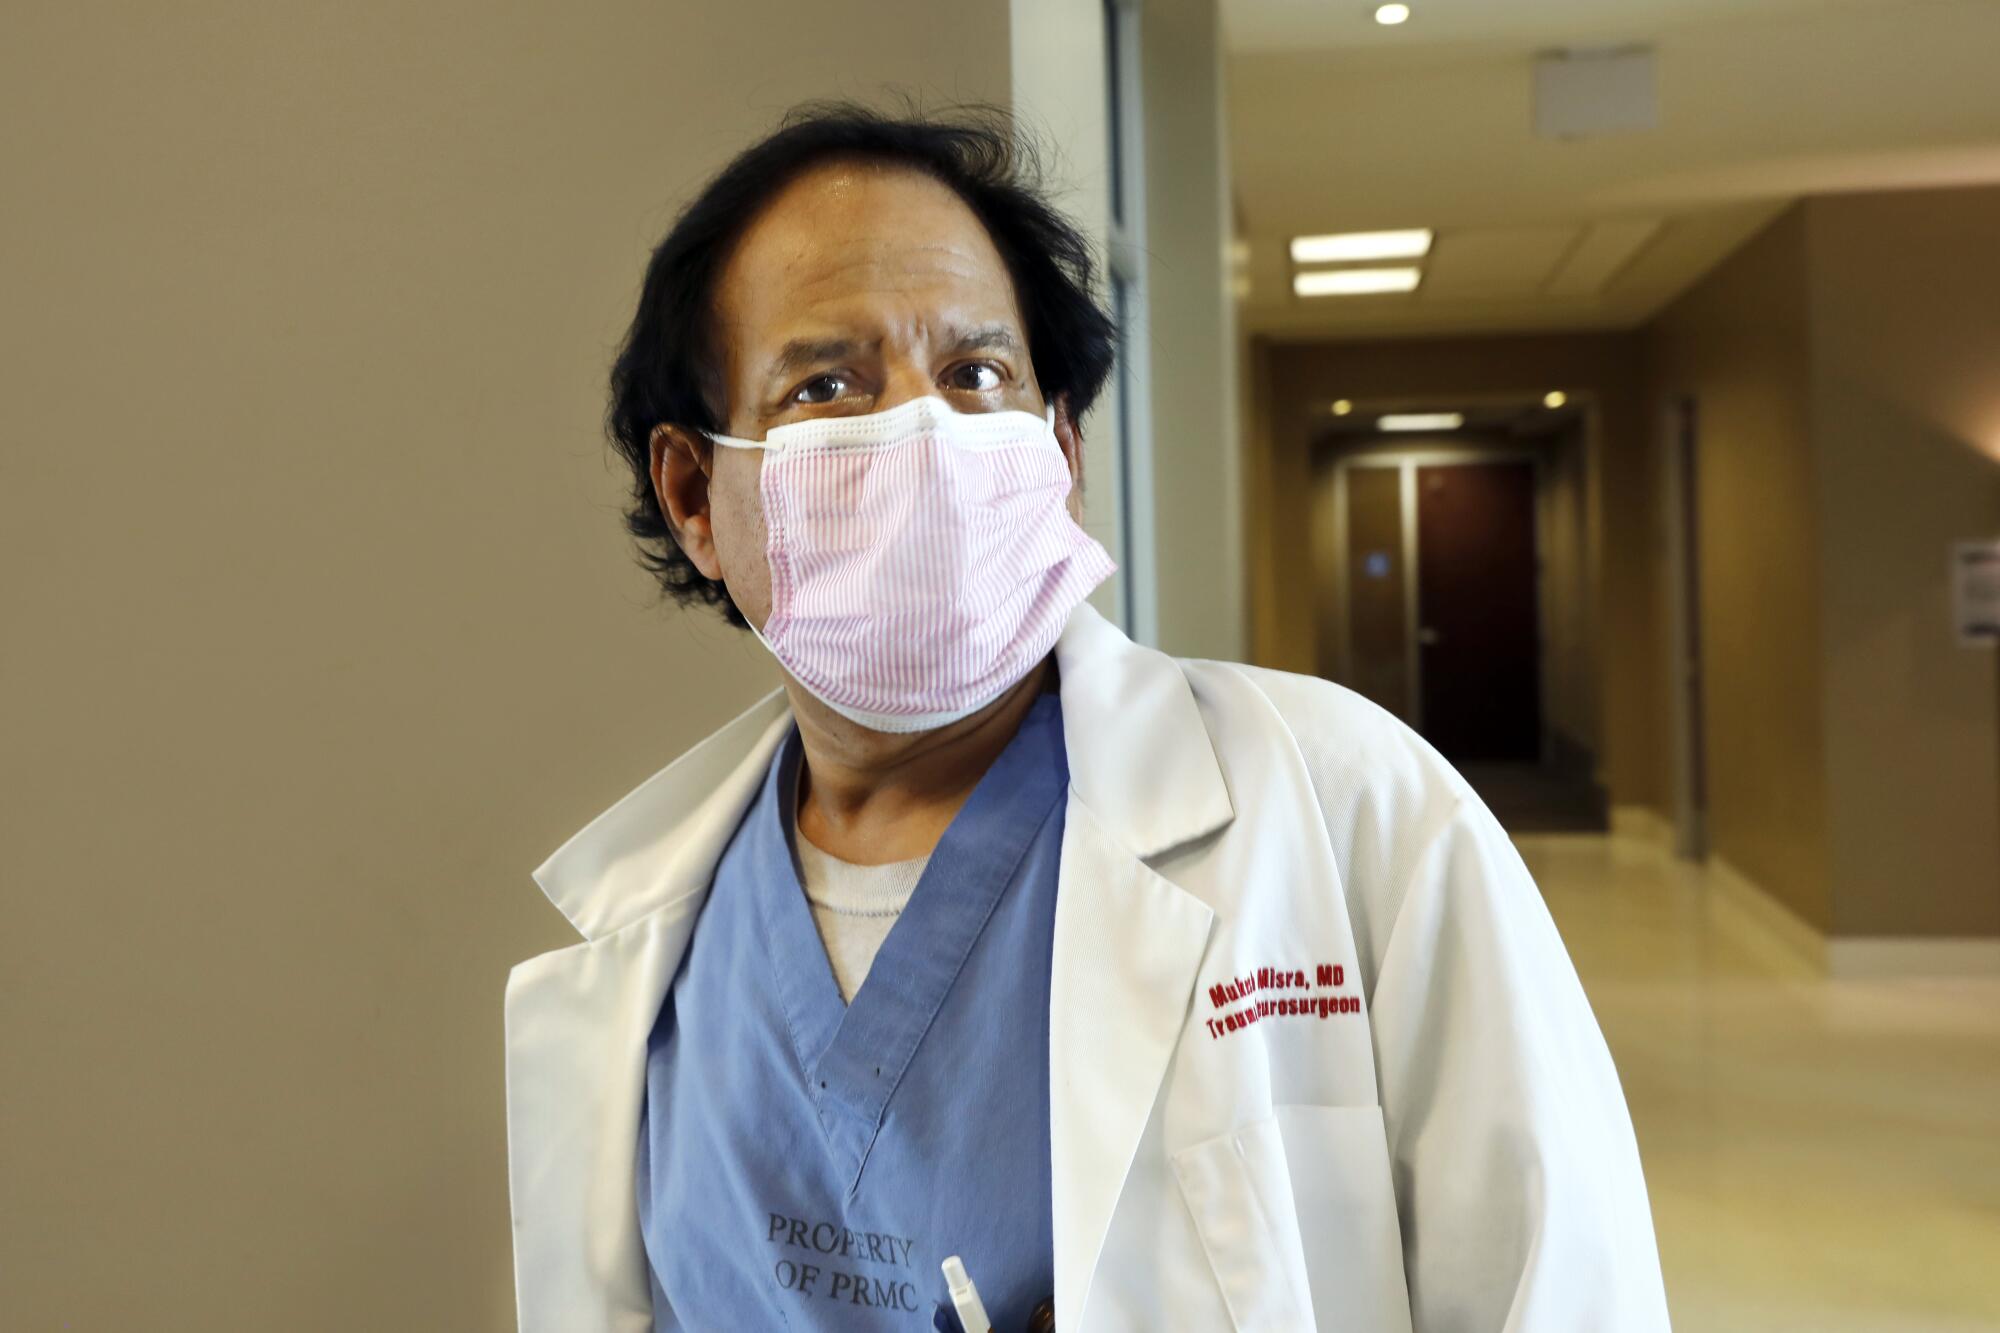 A doctor in a mask in a hospital hallway